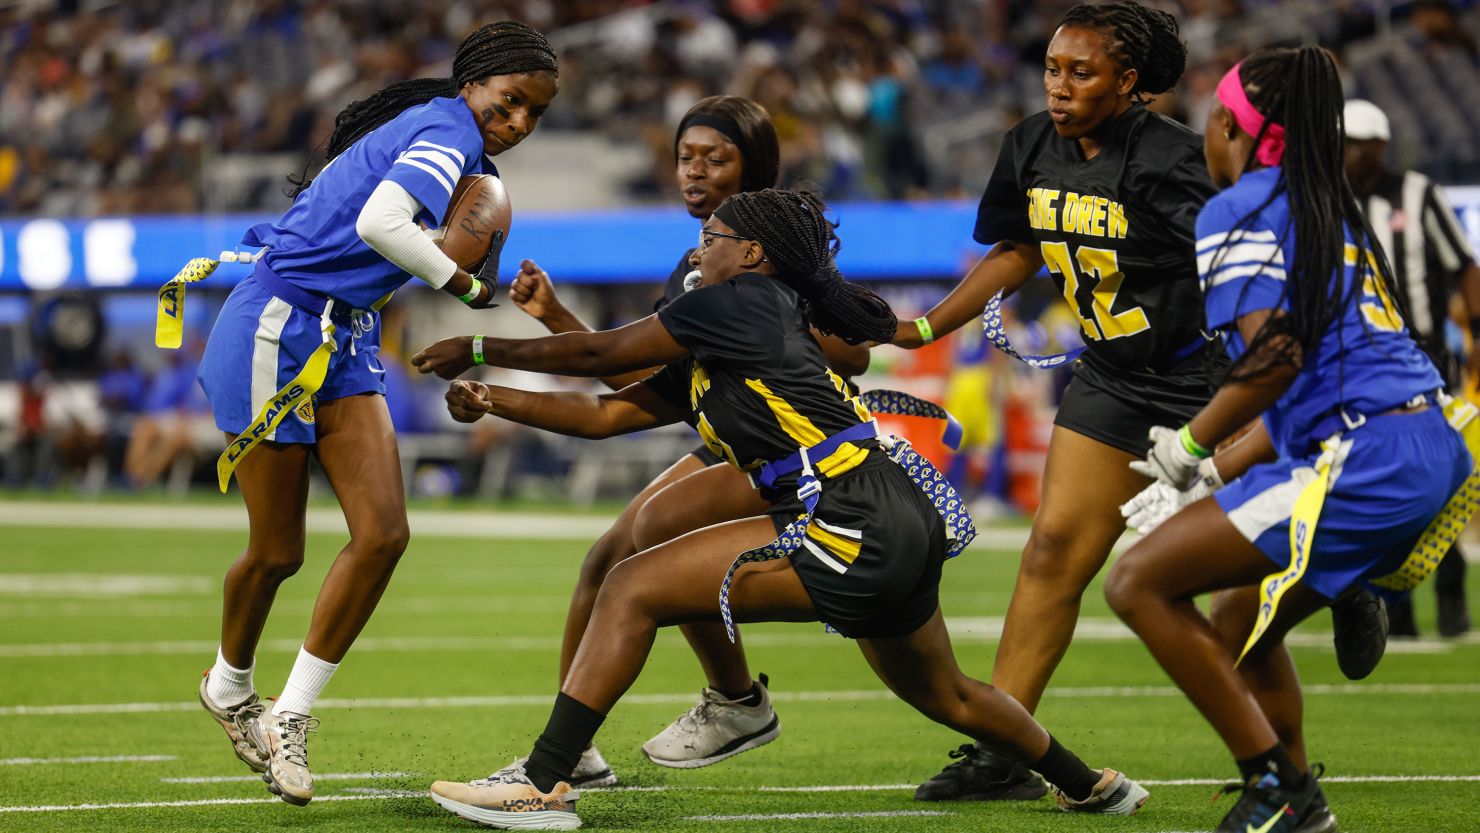 Inglewood, CA - August 19: A player for for Crenshaw girls flag football runs the ball as they play King/Drew at halftime of the Rams and Raiders preseason game at SoFi Stadium on Saturday, Aug. 19, 2023 in Inglewood, CA. (Jason Armond/Los Angeles Times via Getty Images)